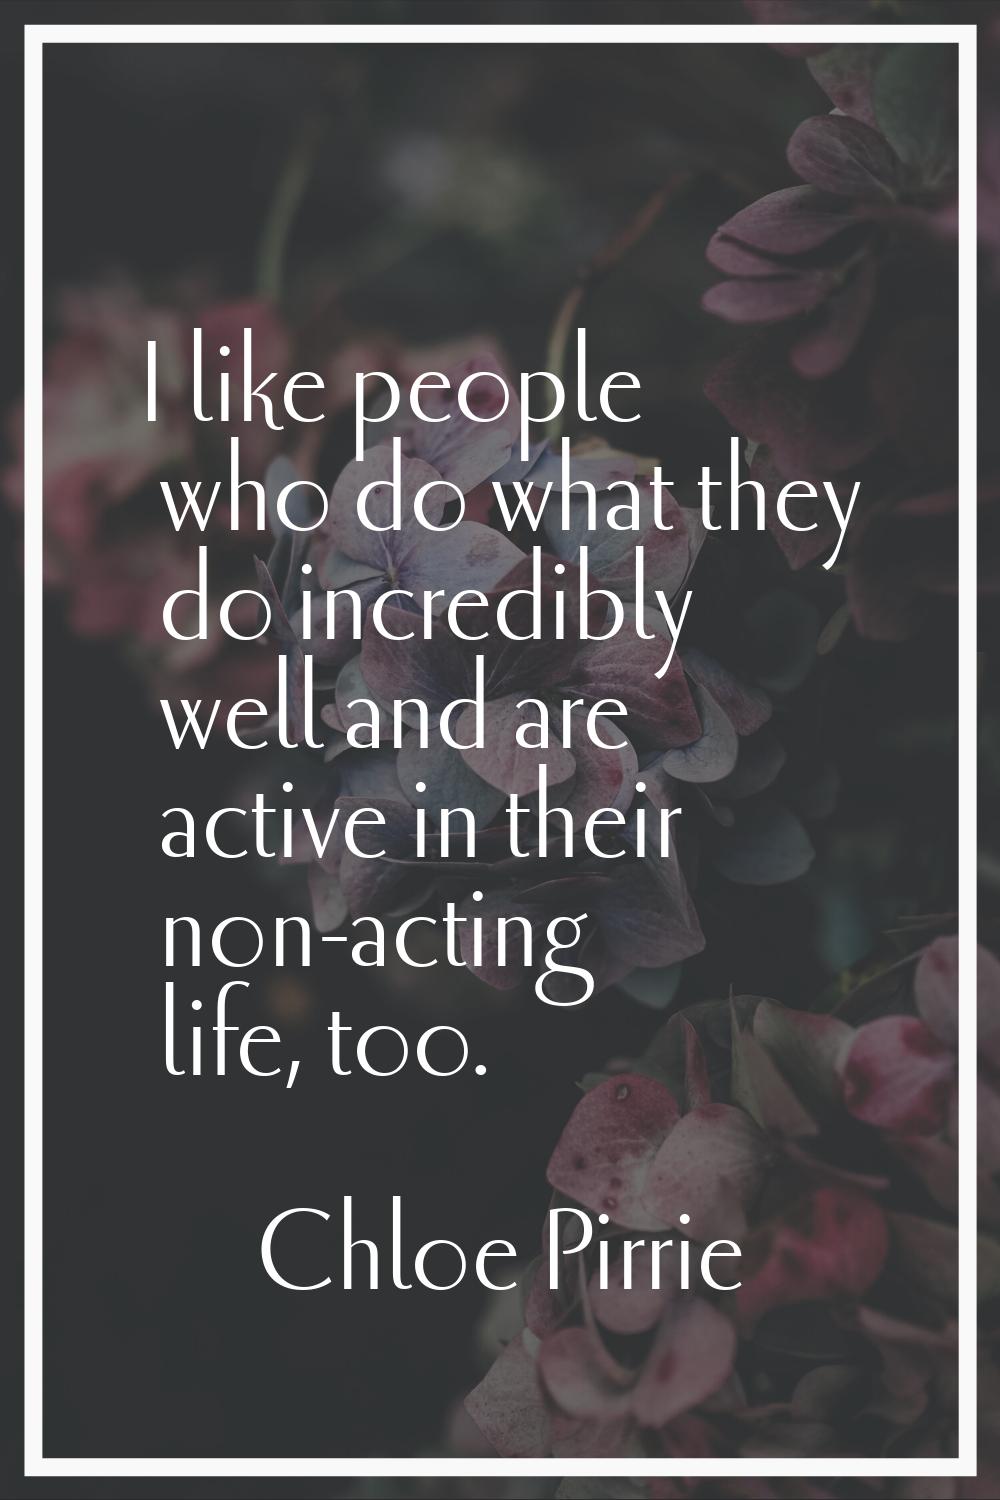 I like people who do what they do incredibly well and are active in their non-acting life, too.